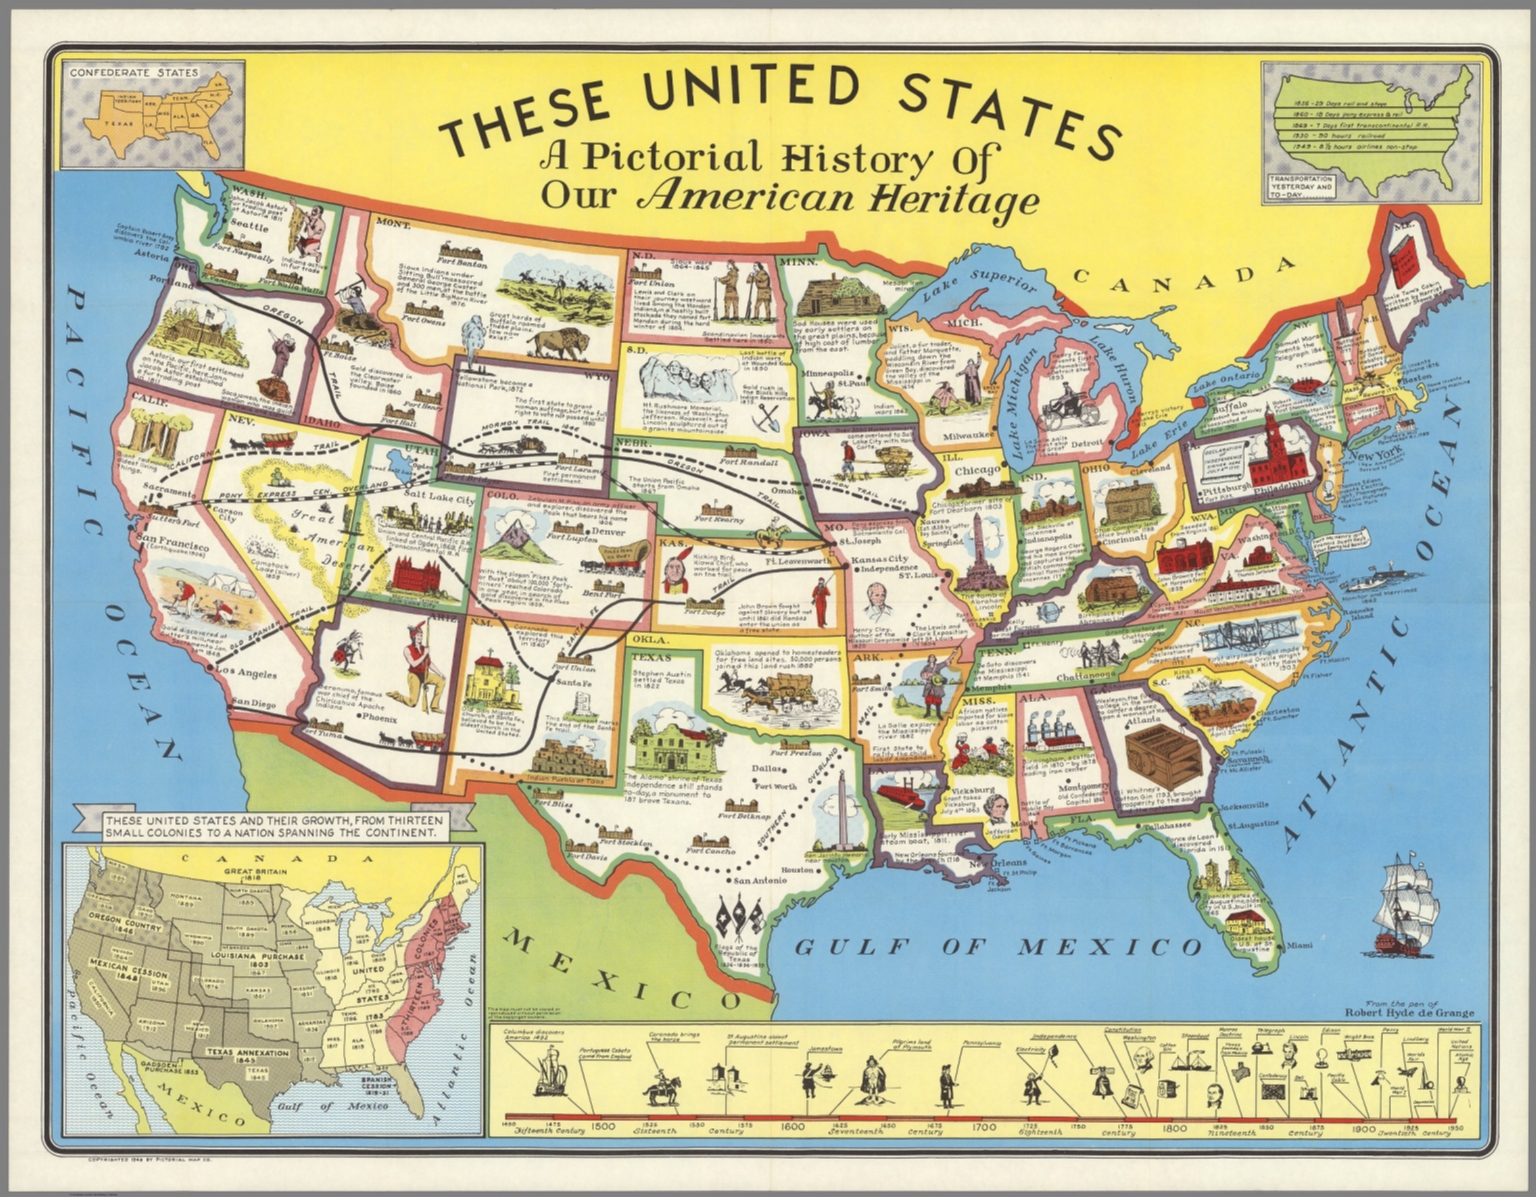 These United States a pictorial history of our American heritage